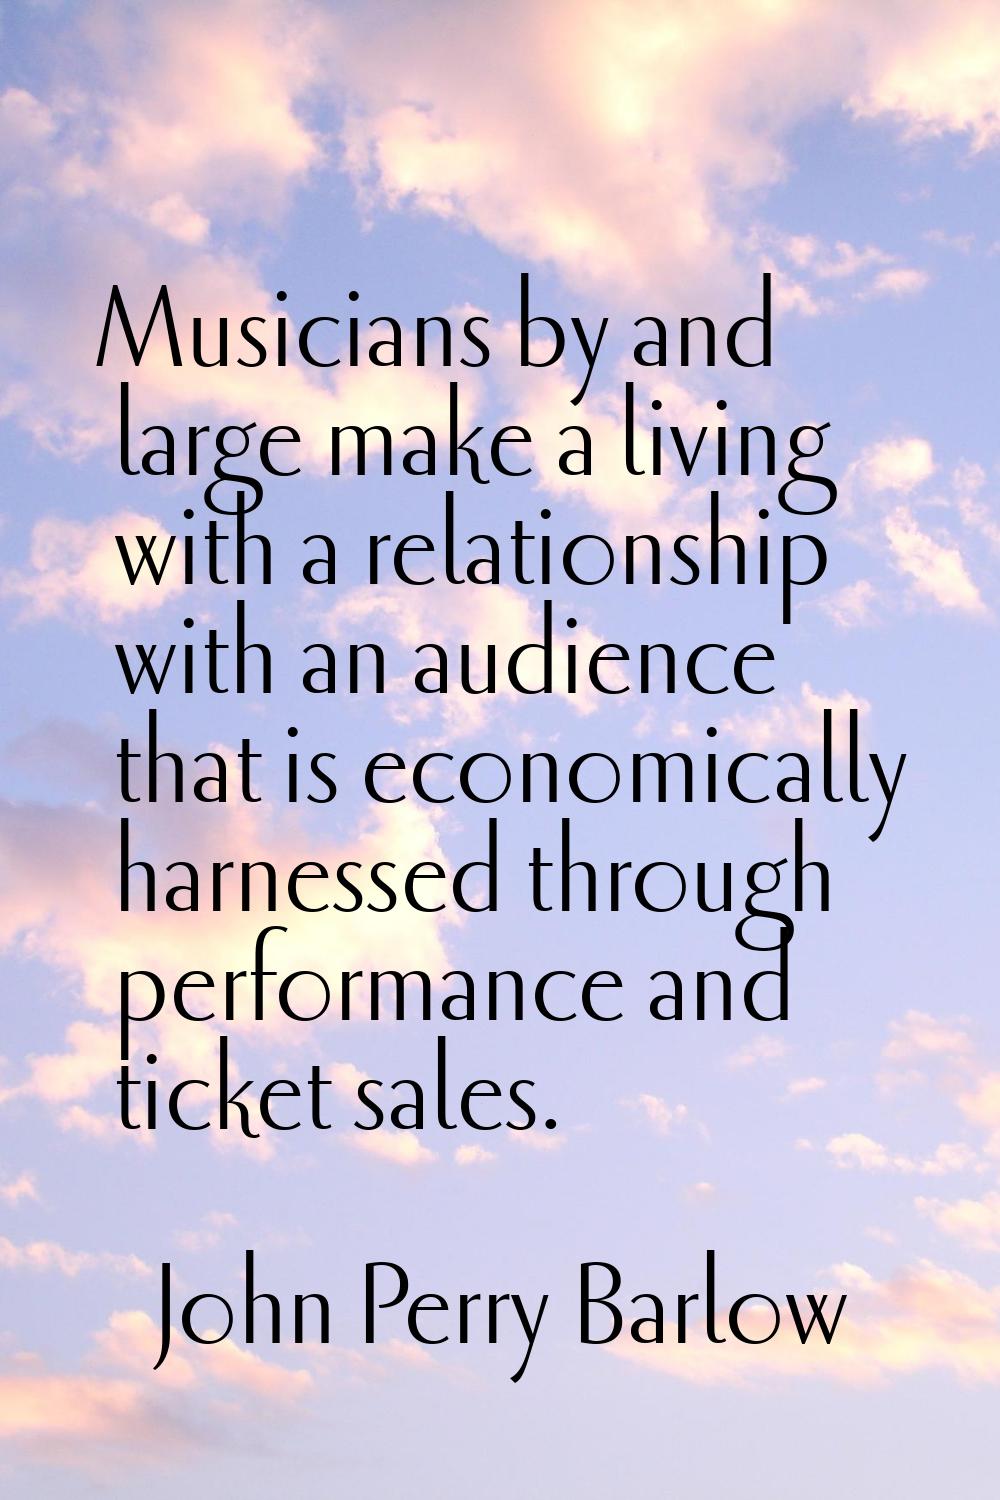 Musicians by and large make a living with a relationship with an audience that is economically harn